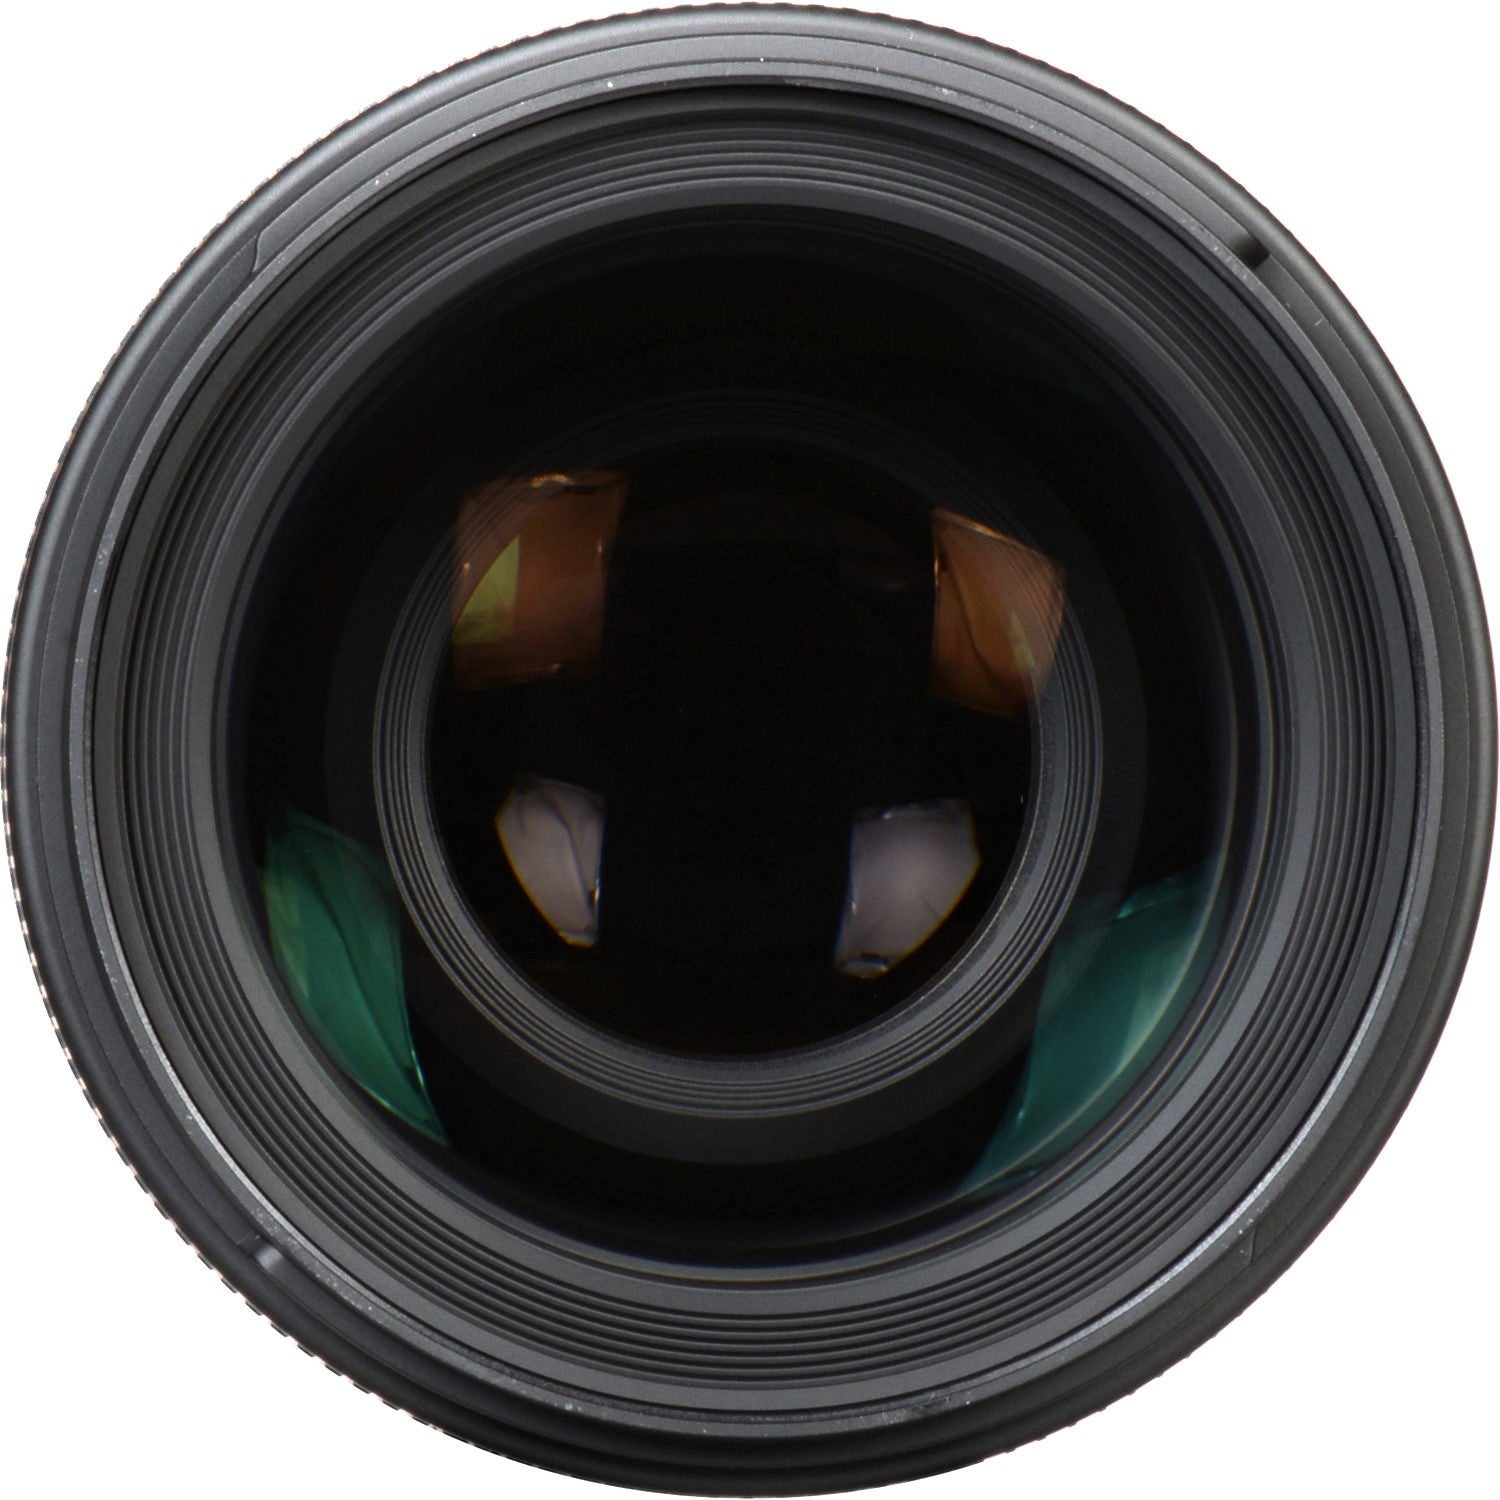 Sigma 50-100mm F1.8 DC HSM Art Lens for Canon EF in a Front Close-Up View